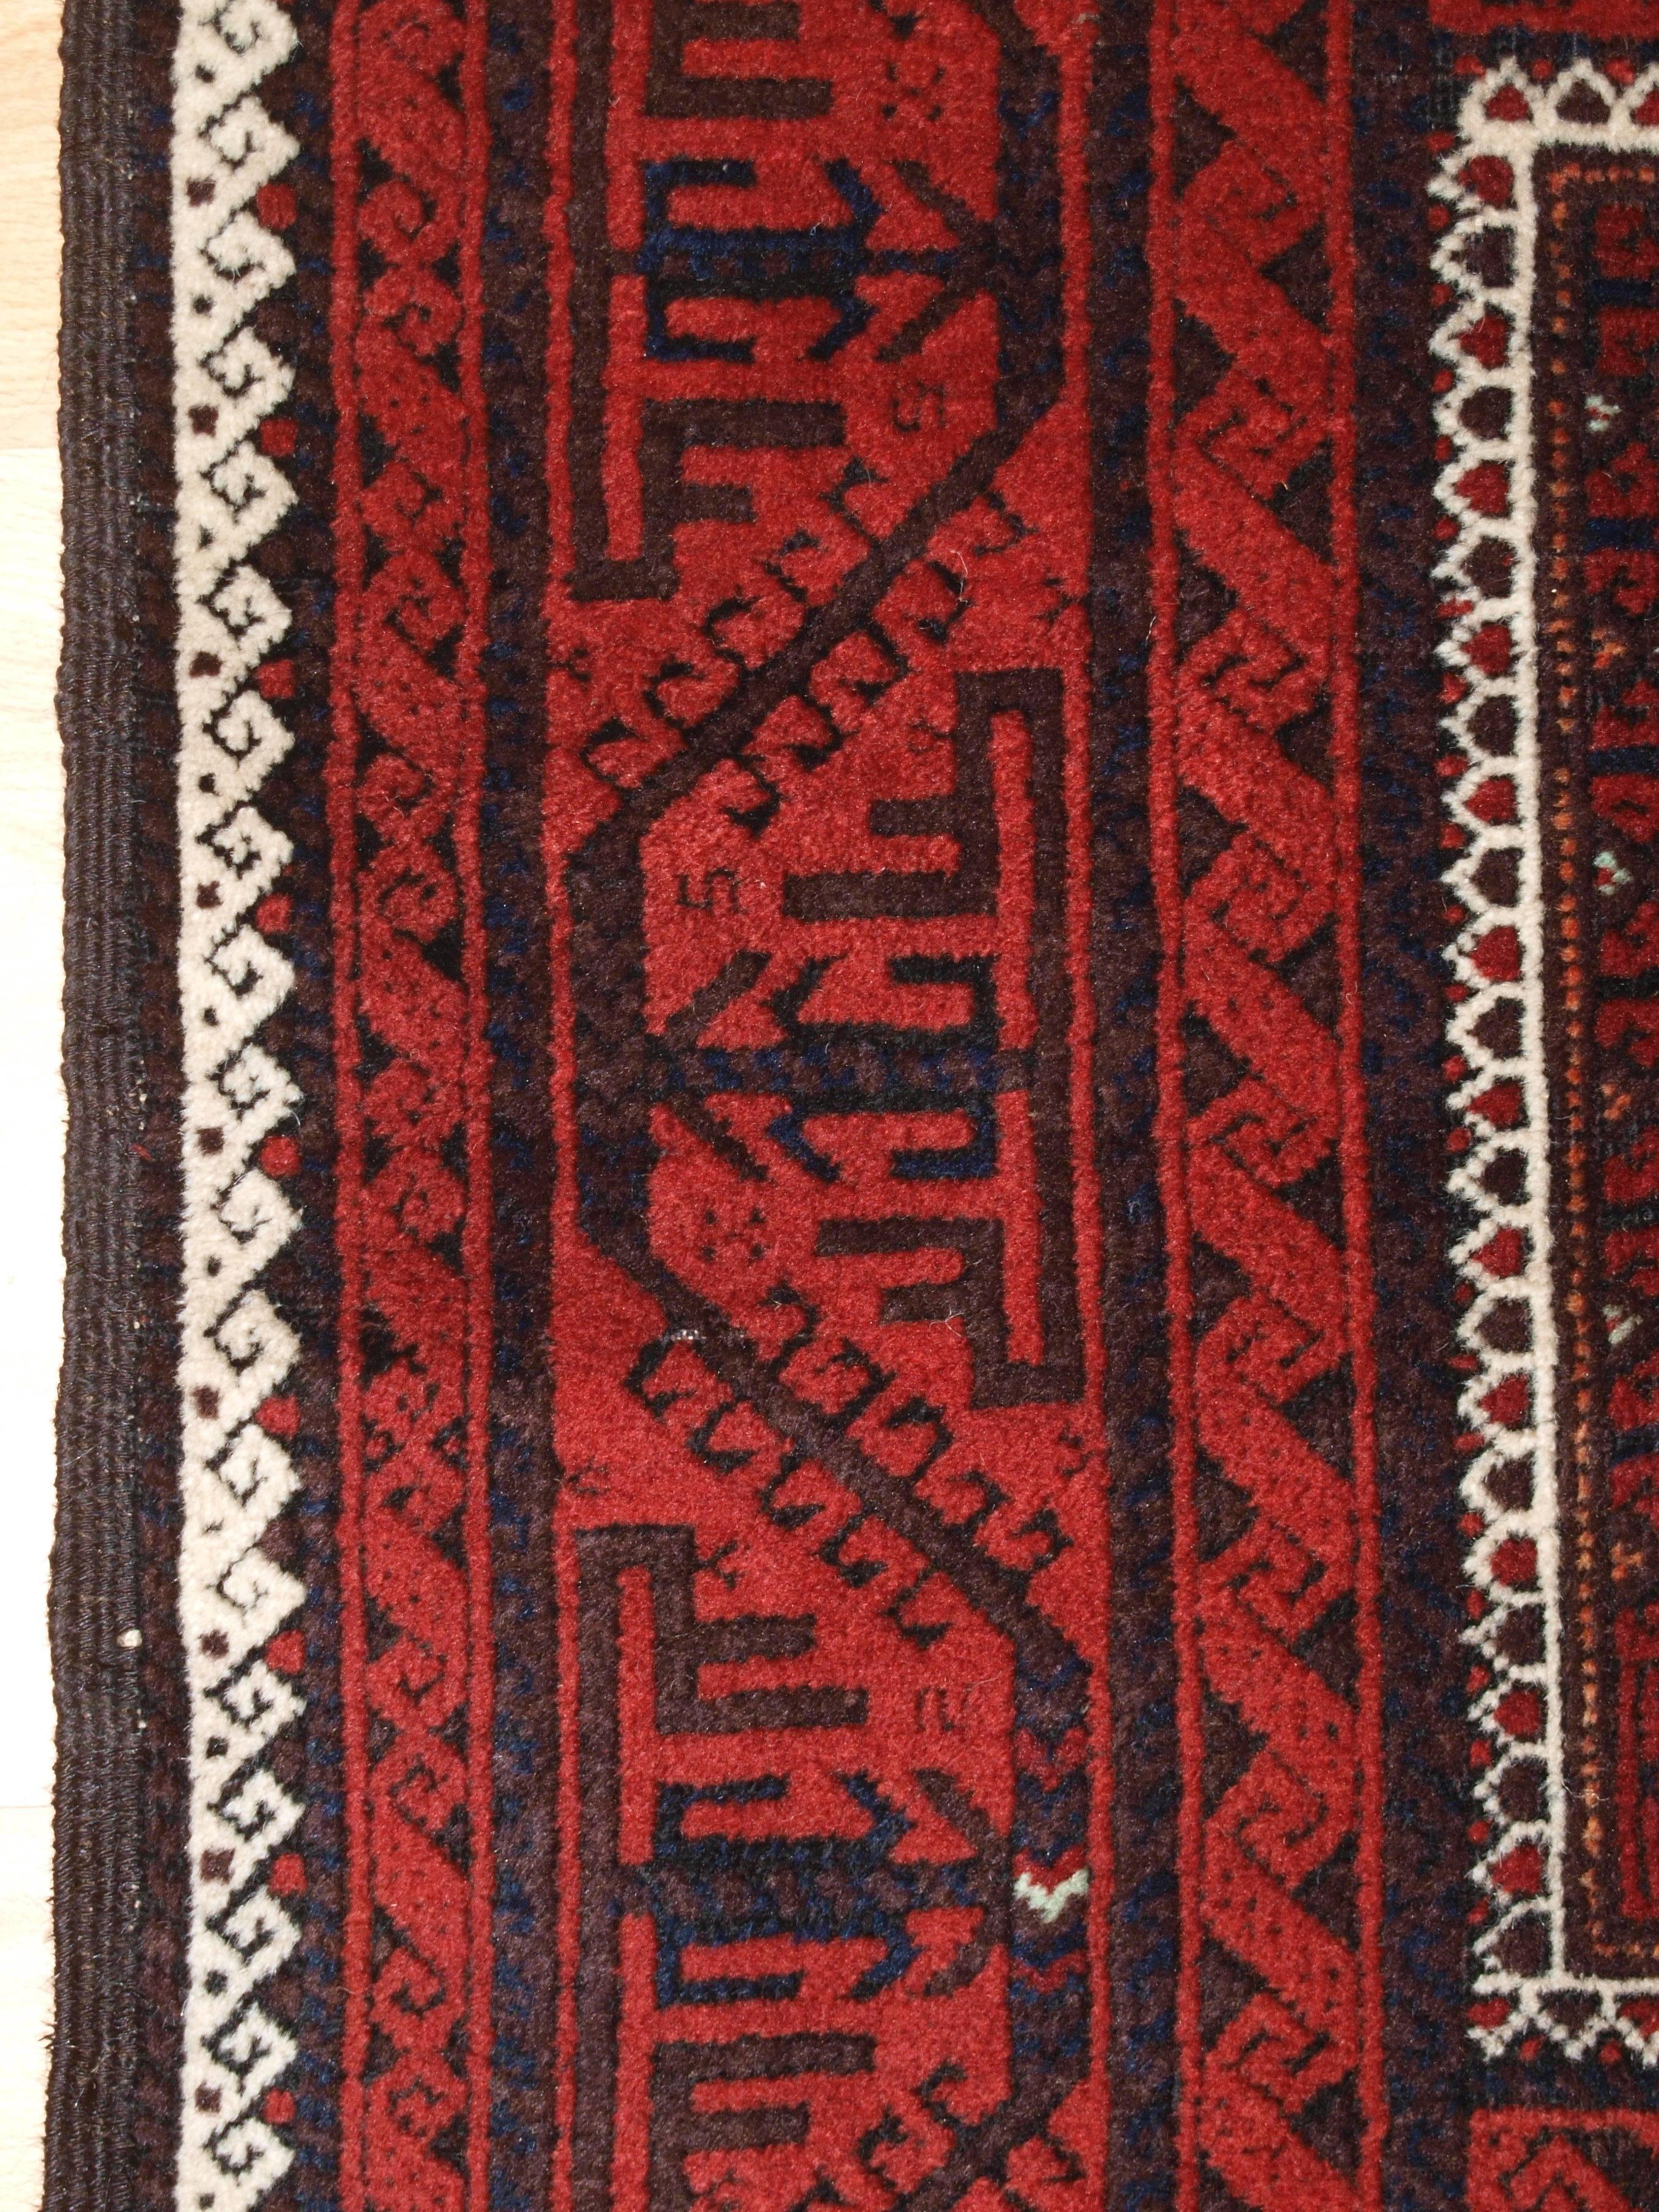 Wool Antique Baluch Rug with Unusual Three Compartment Design, circa 1900 For Sale